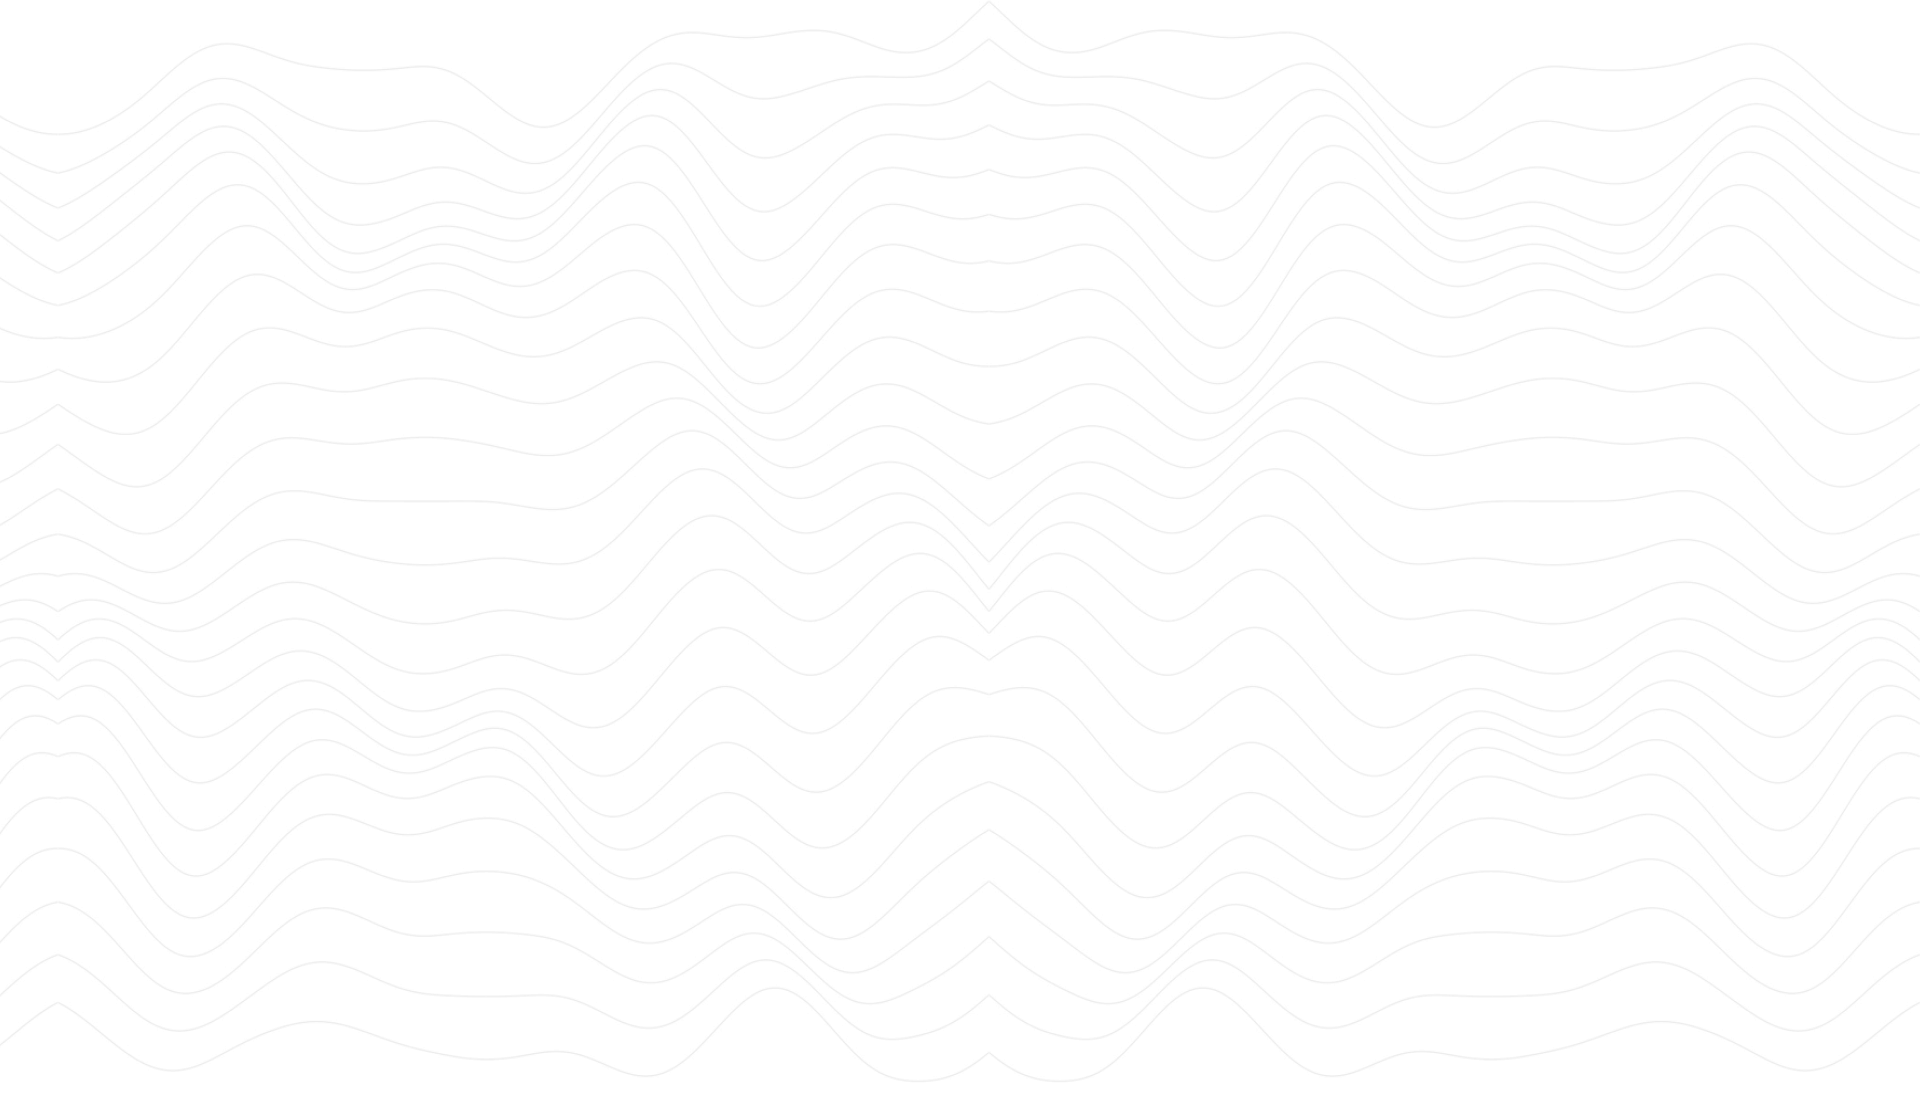 A white background with grey wavy lines.